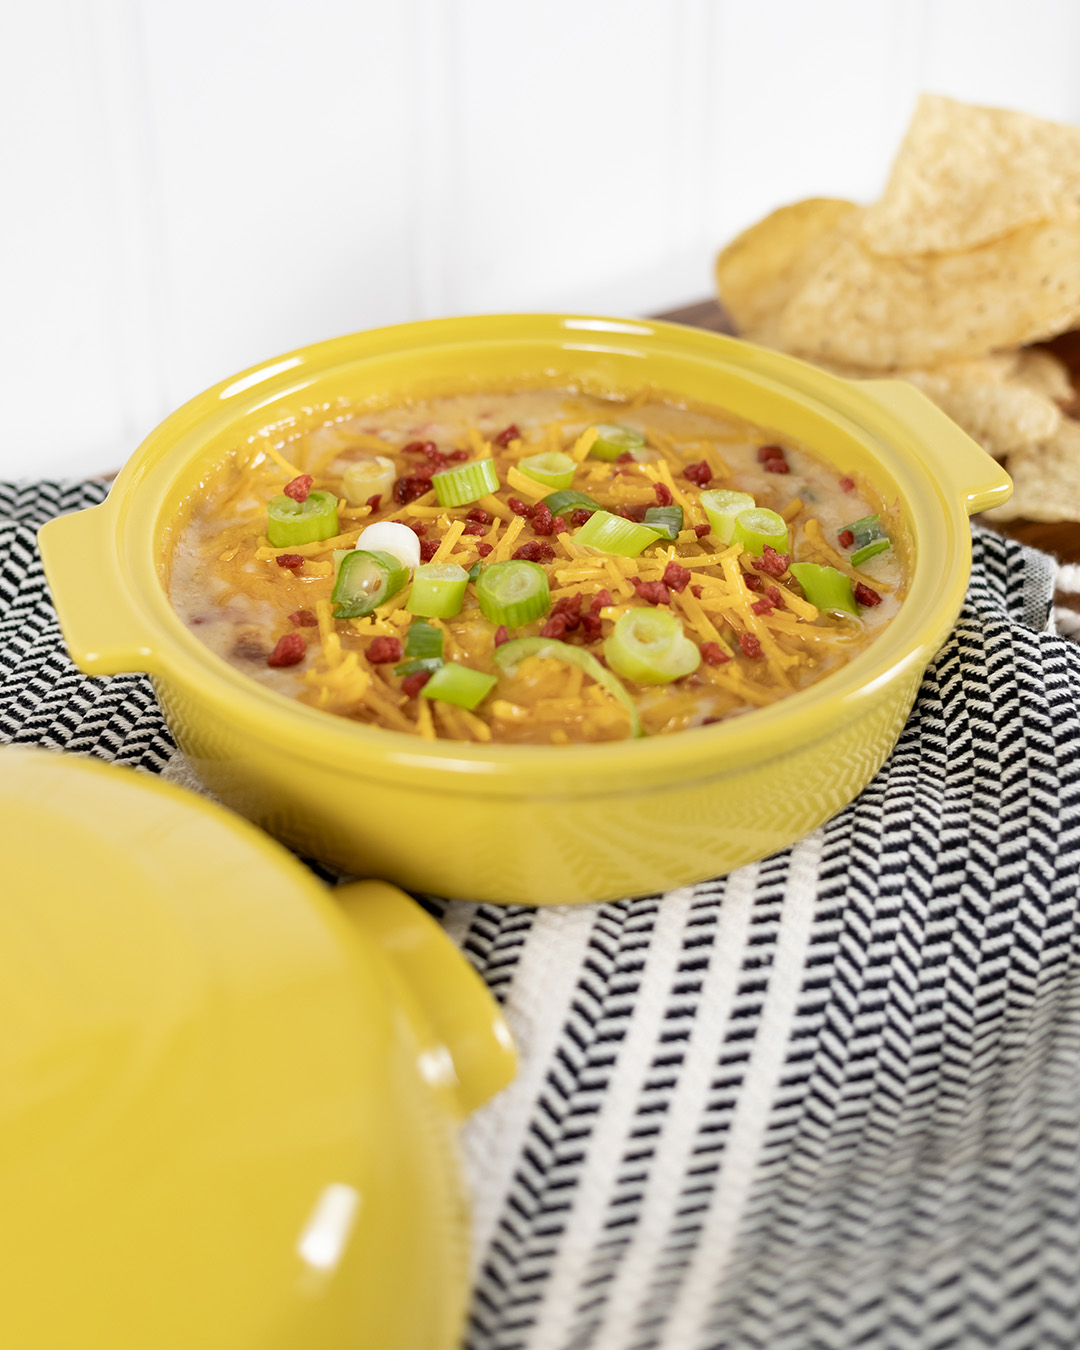 Try this plant-based jalapeño popper dip recipe for your next potluck, gathering, or game day! This is one that everyone - plant-based or not - can enjoy together!